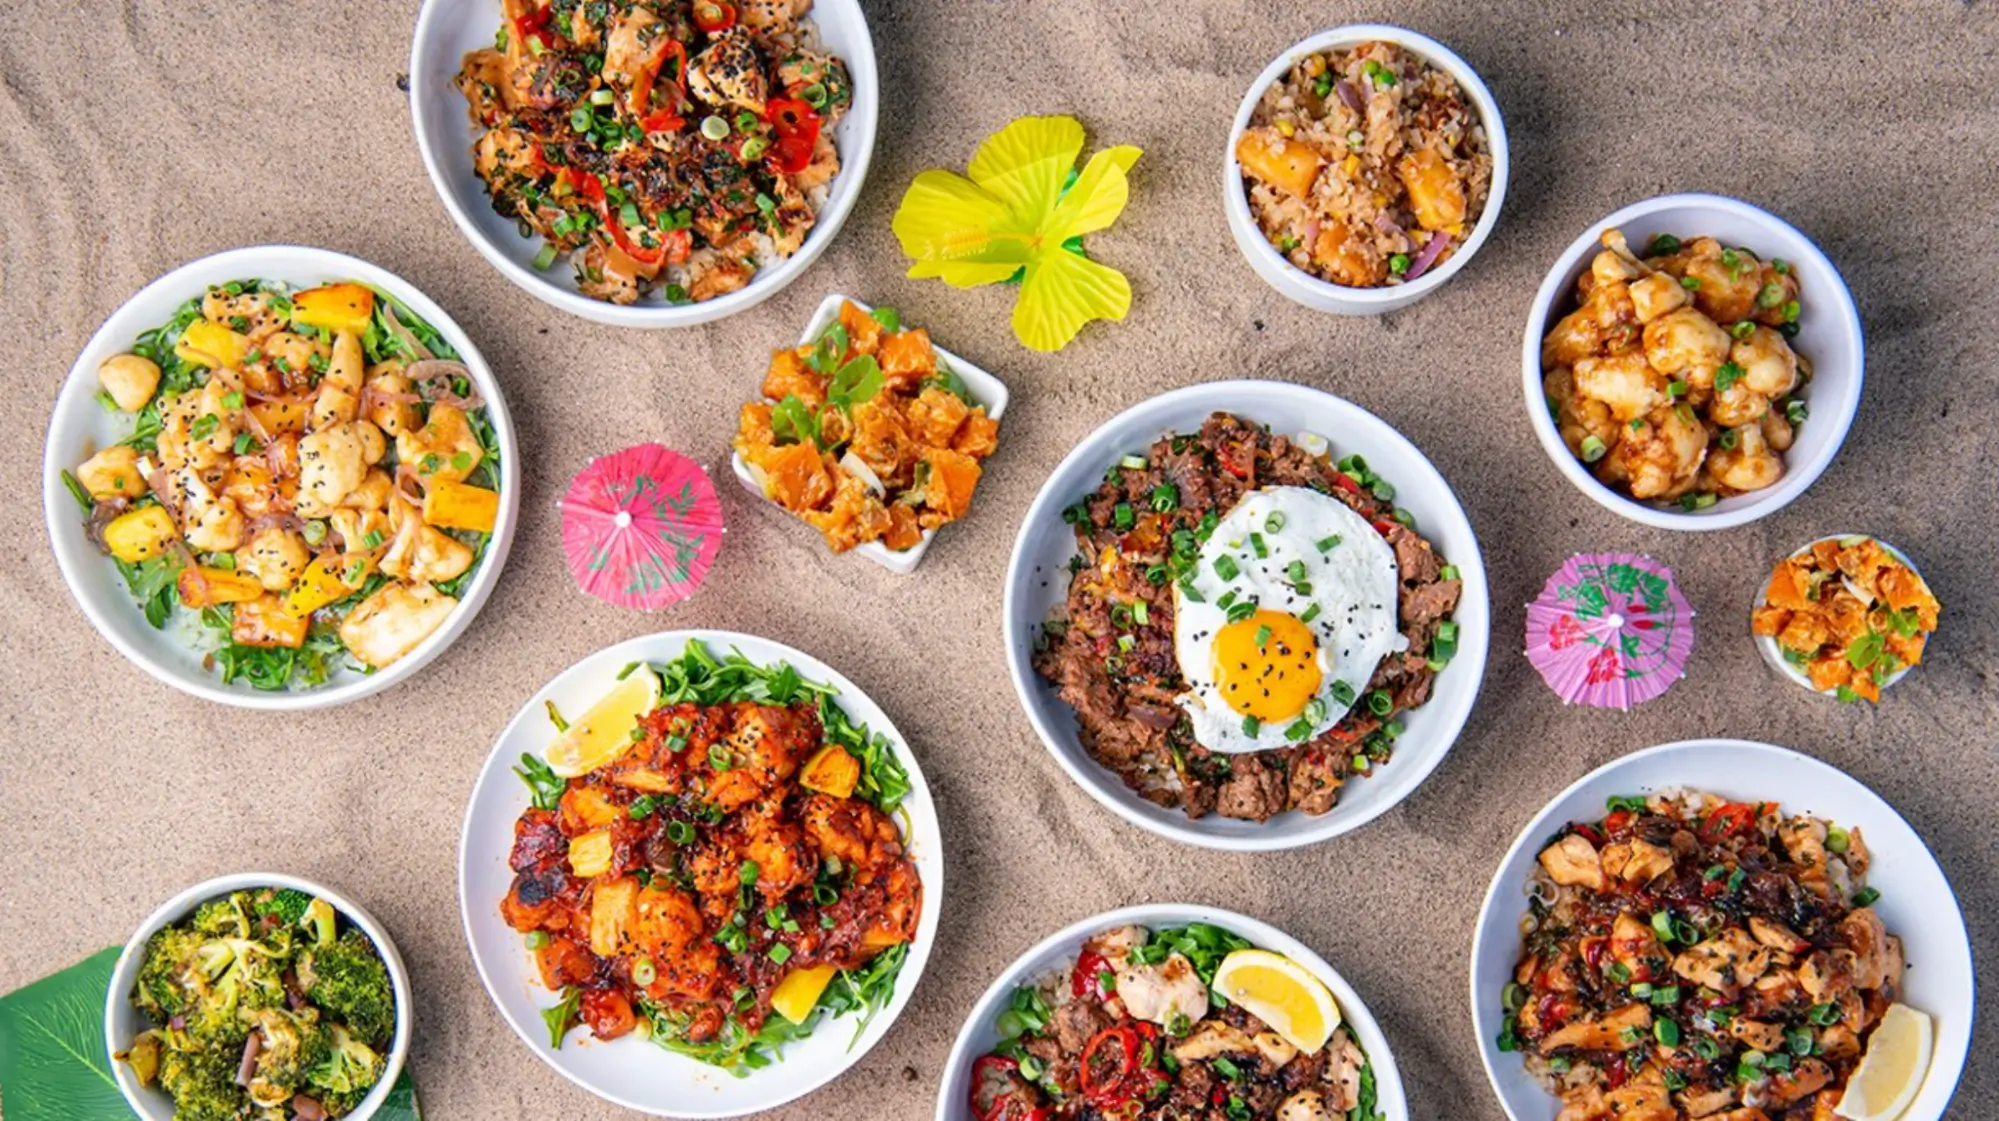 An assortment of bowls of Hawaiian-looking meals on a sandy background with a tropical flower and drink umbrellas